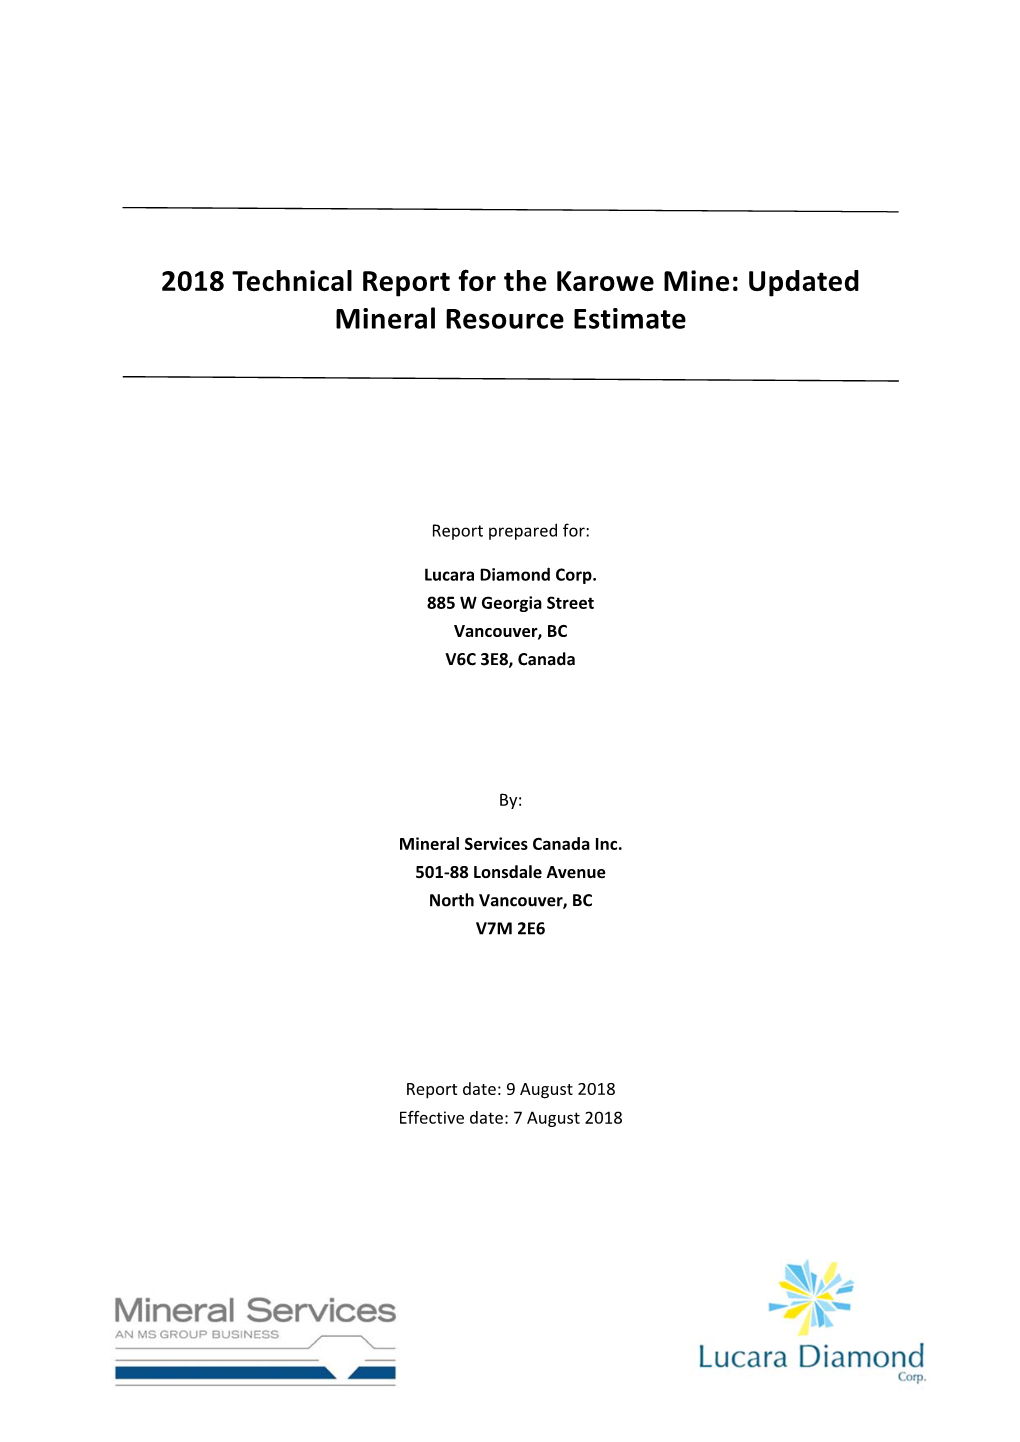 2018 Technical Report for the Karowe Mine: Updated Mineral Resource Estimate